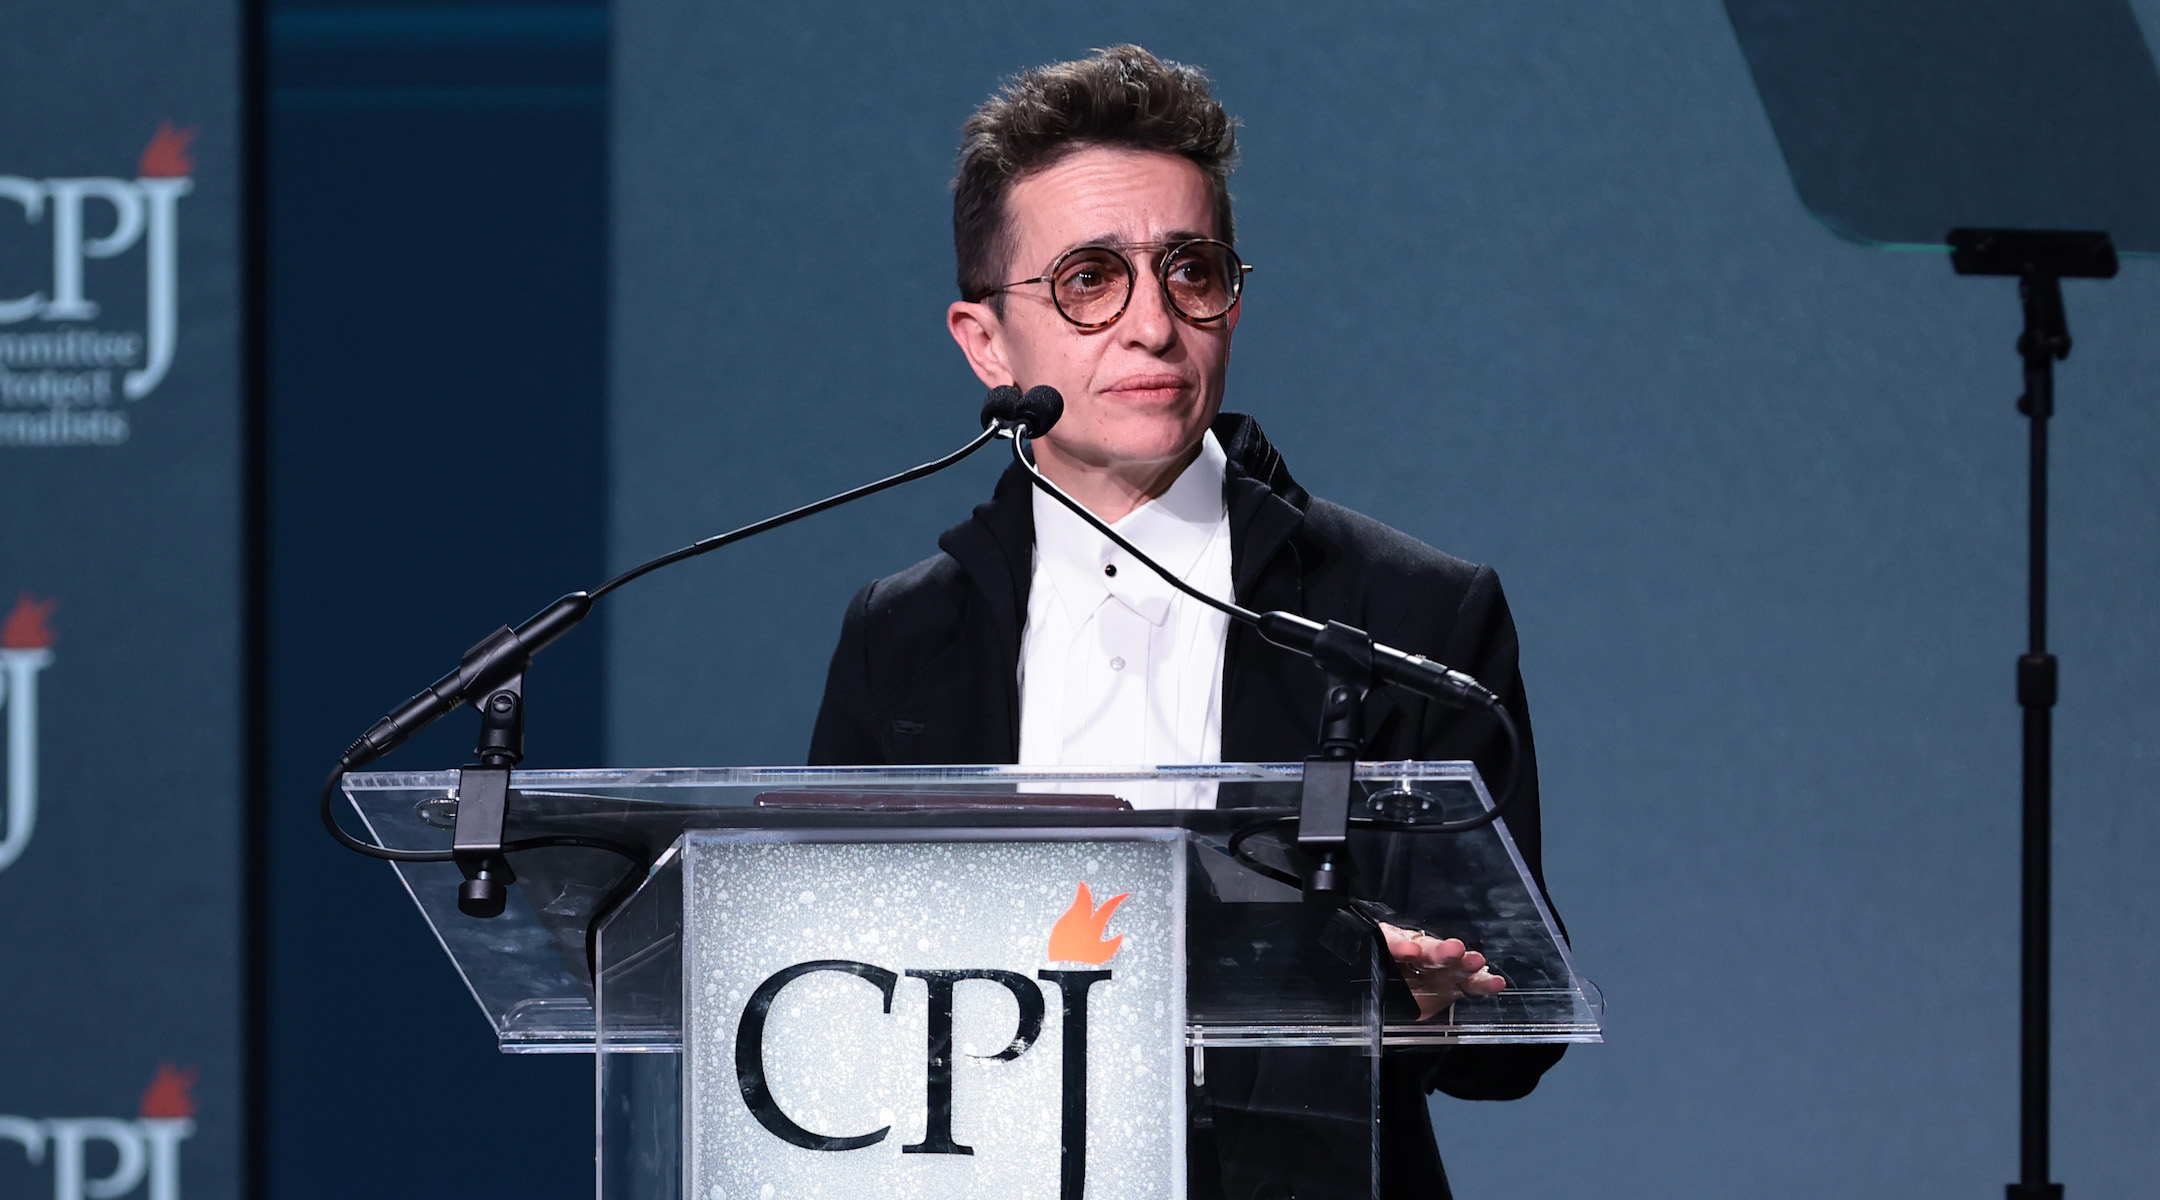 Masha Gessen speaks onstage at the 2022 CPJ International Press Freedom Awards at Glasshouses on November 17, 2022 in New York City. (Dimitrios Kambouris/Getty Images)